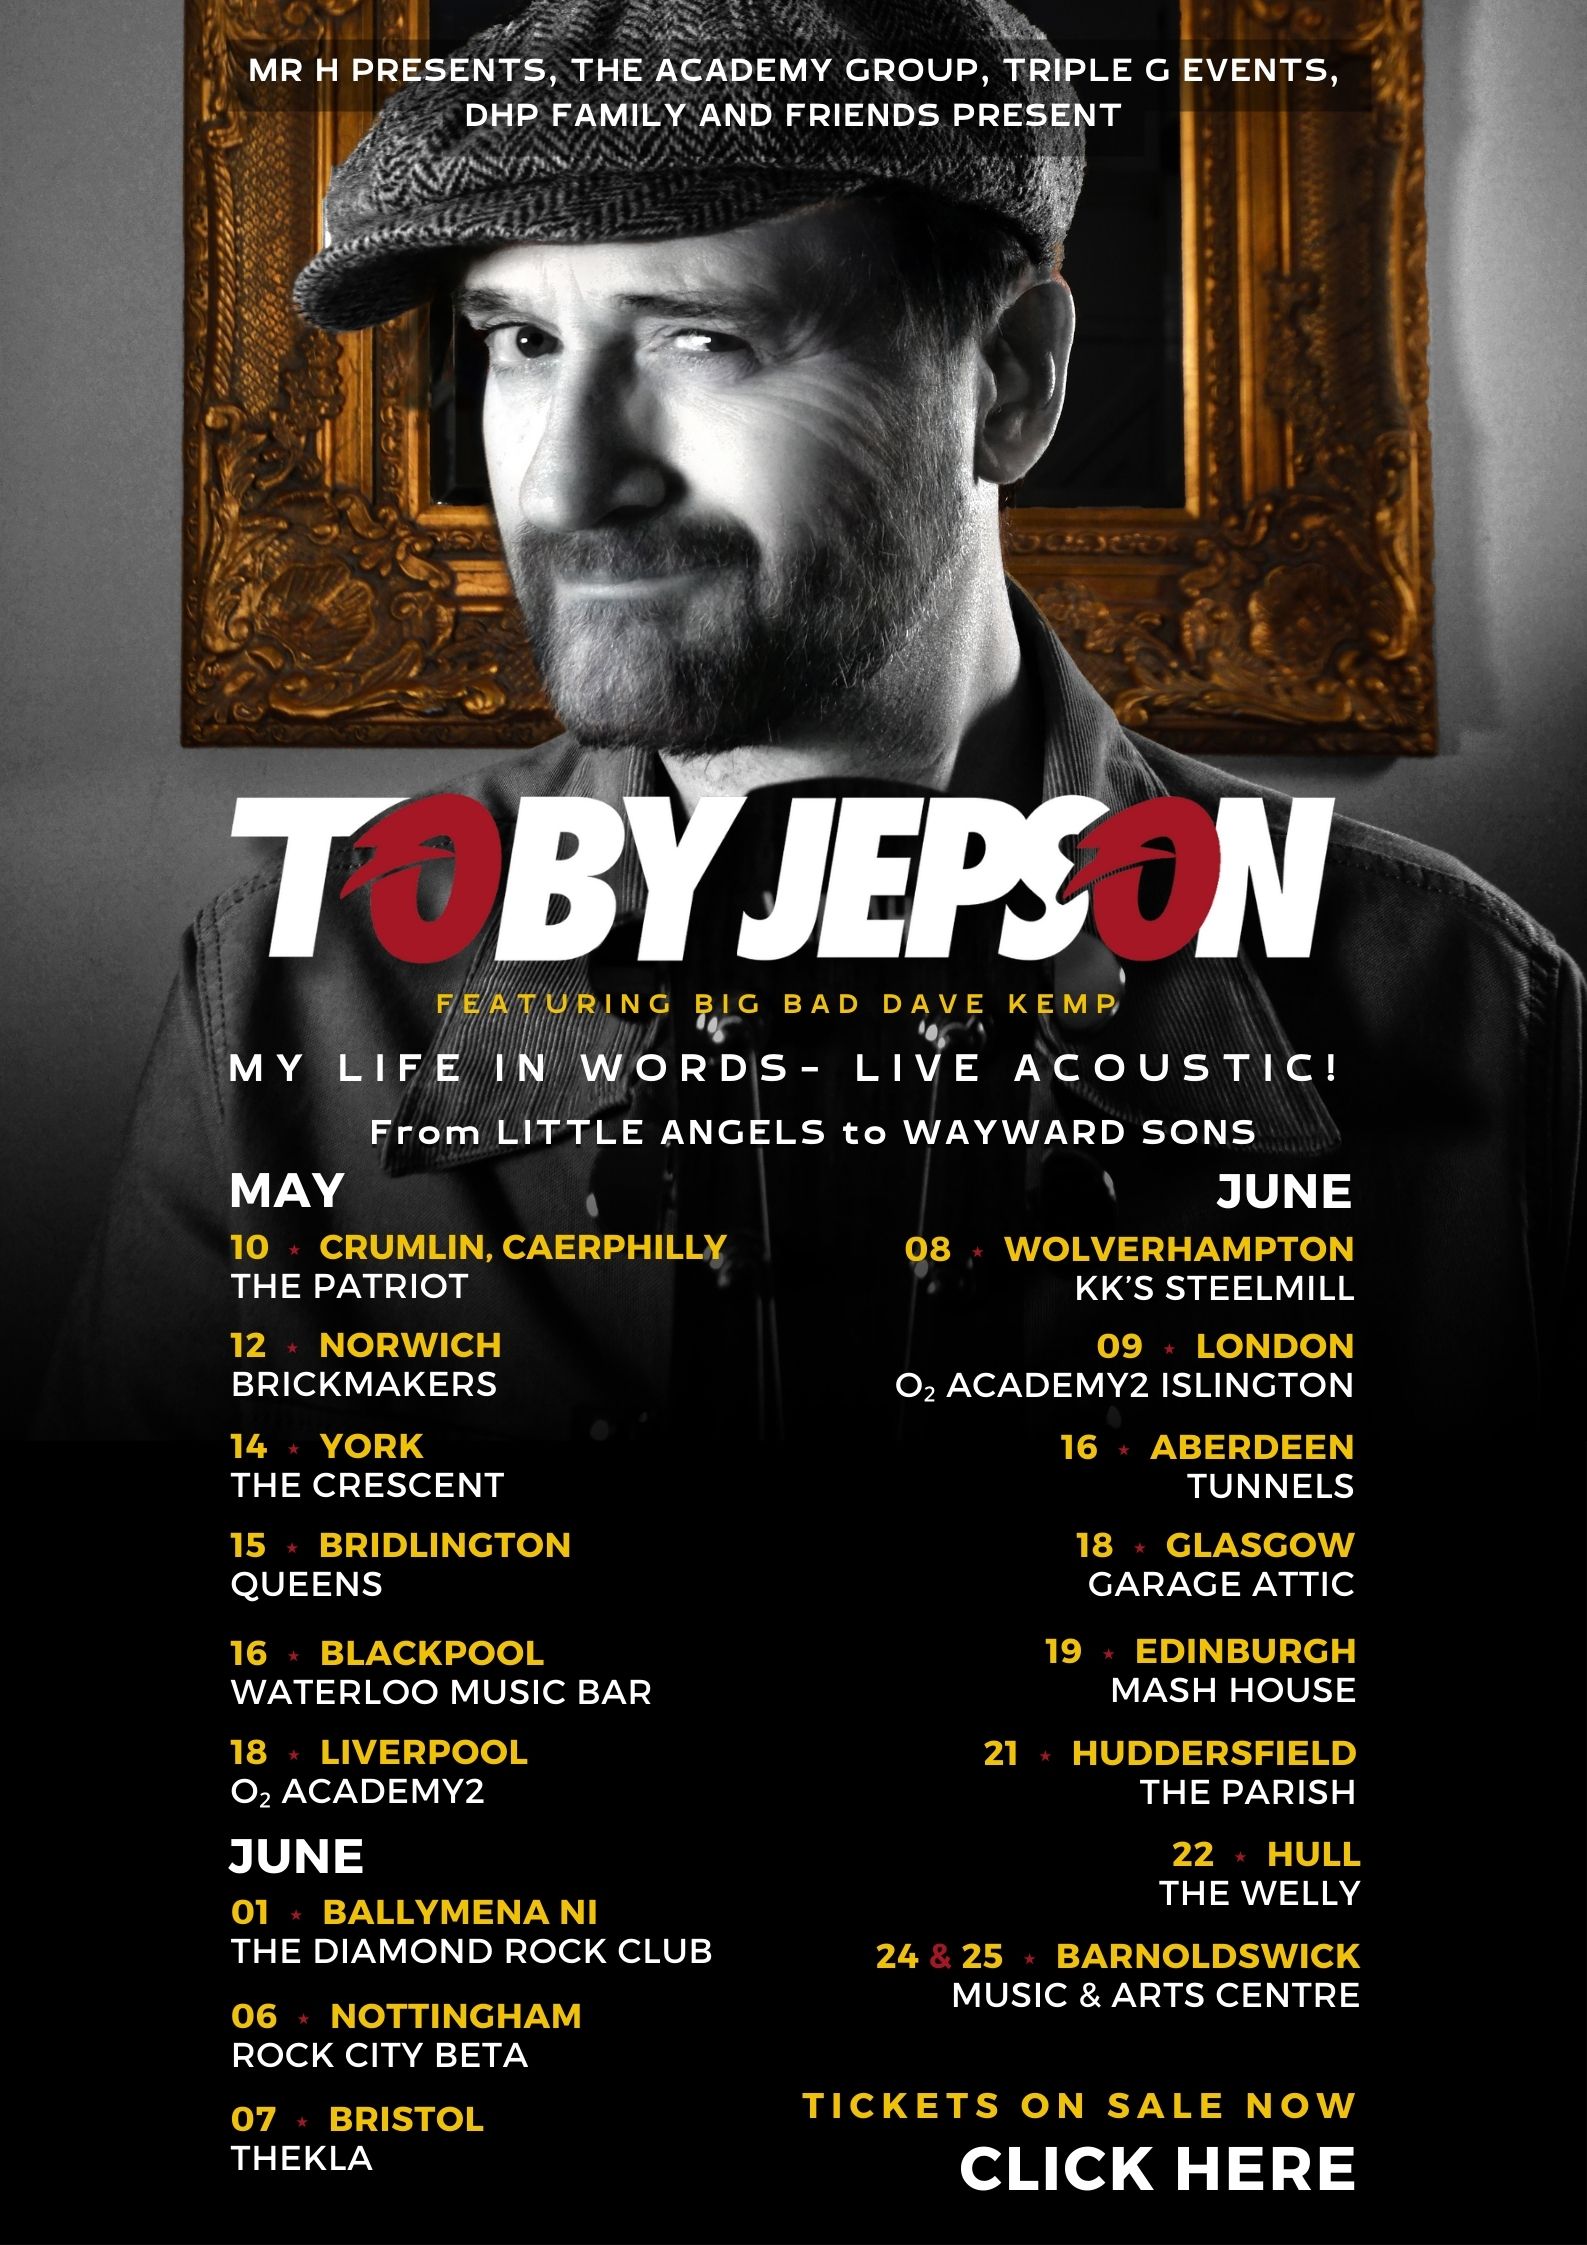 Former Little Angels frontman and Planet ROck DJ, Wayward Sons singer and songwriter Toby Jepson is on tour this May/June